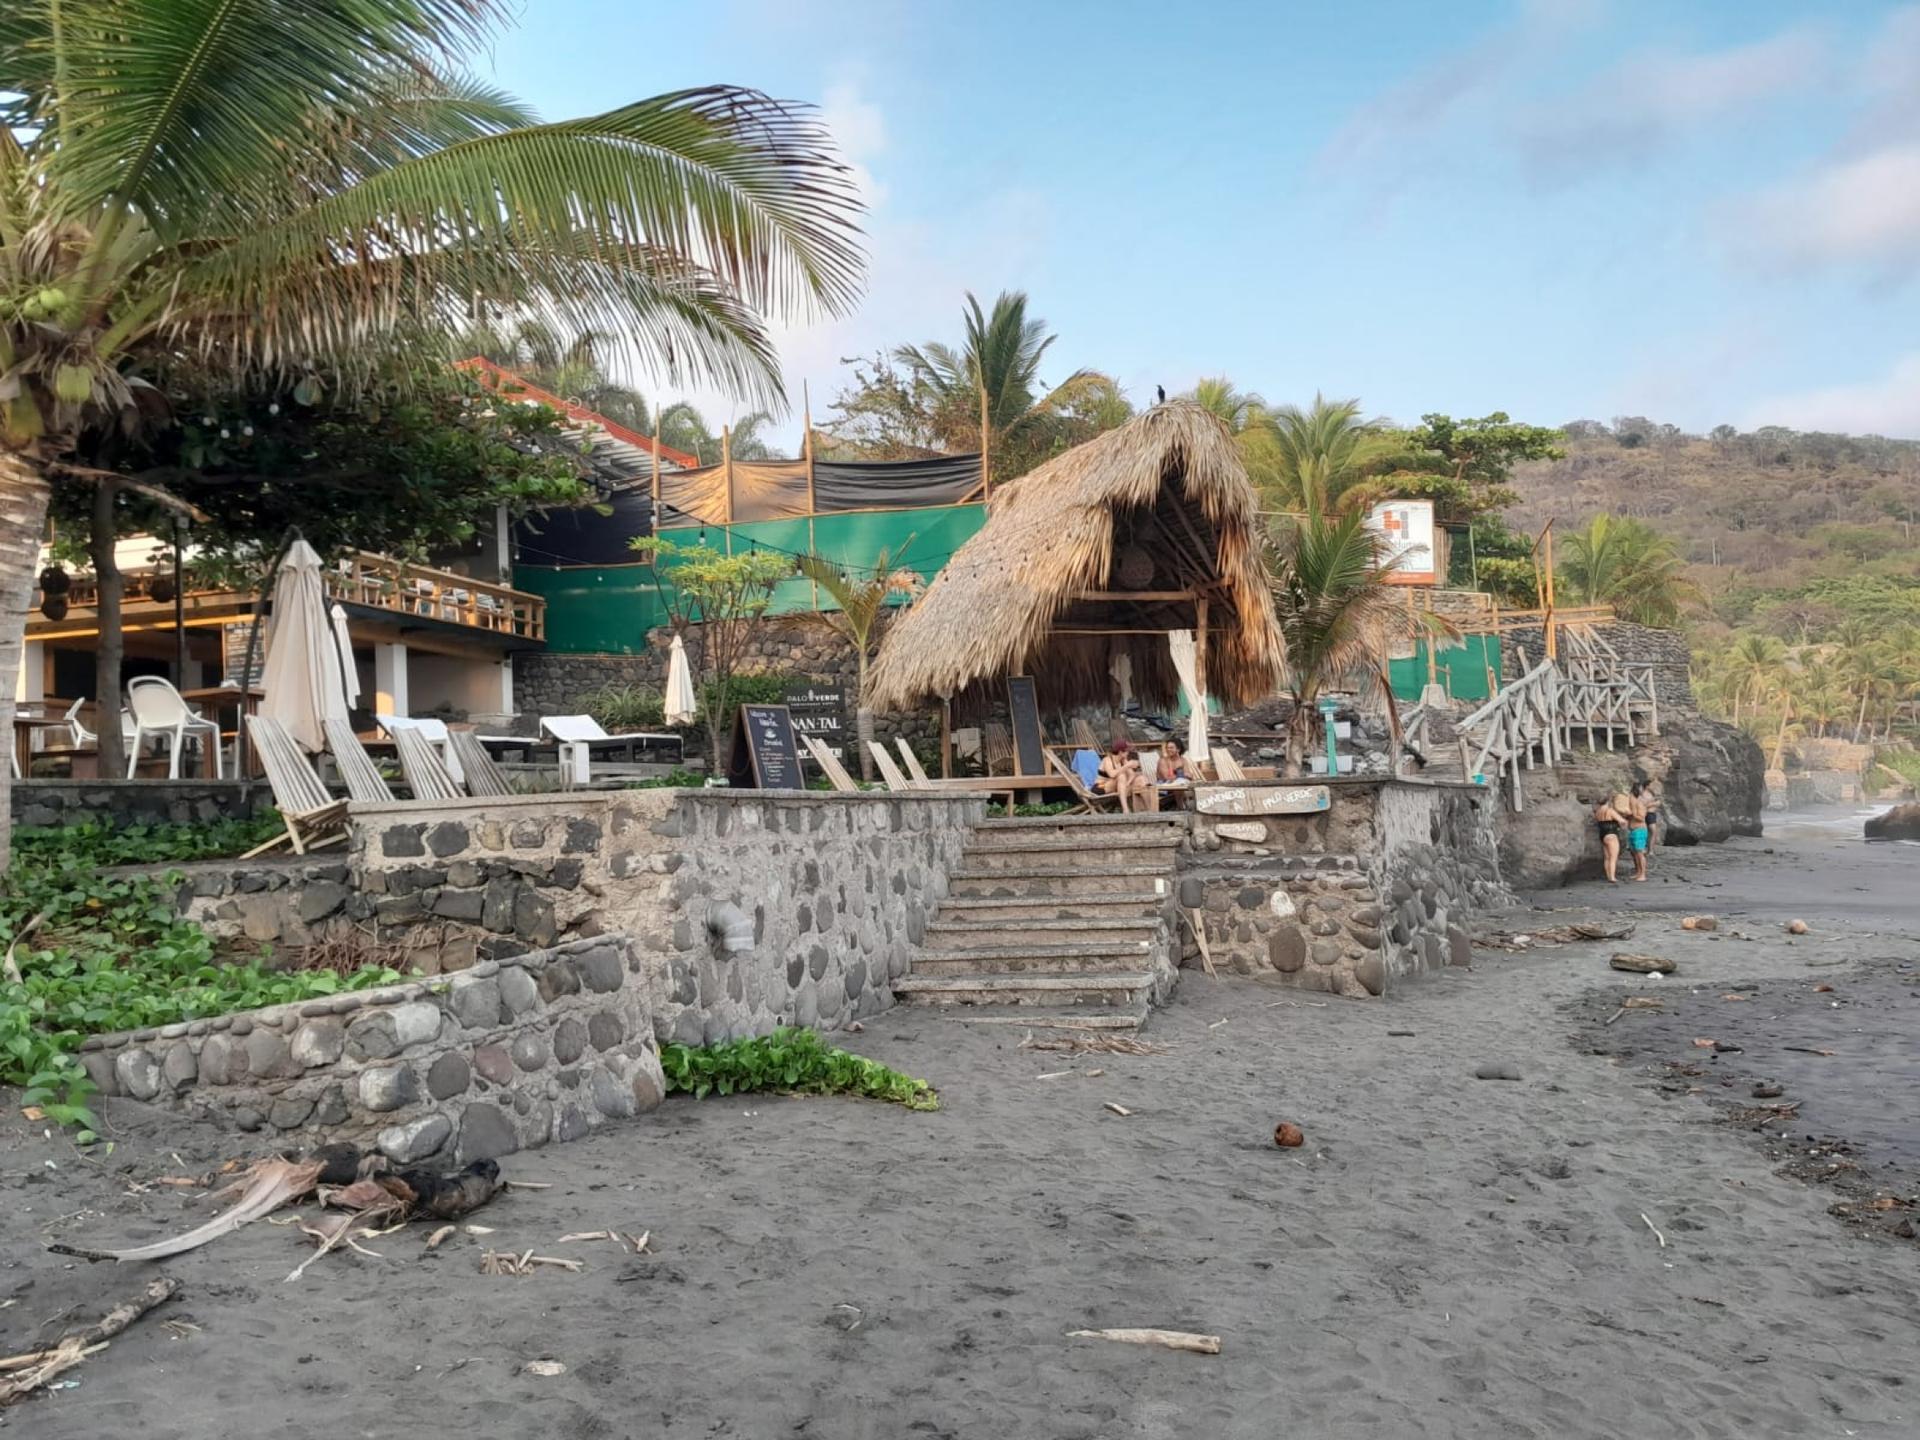 Restaurants and new upscale hotels have cropped up along the sandy strip of Bitcoin Beach, El Zonte, El Salvador.